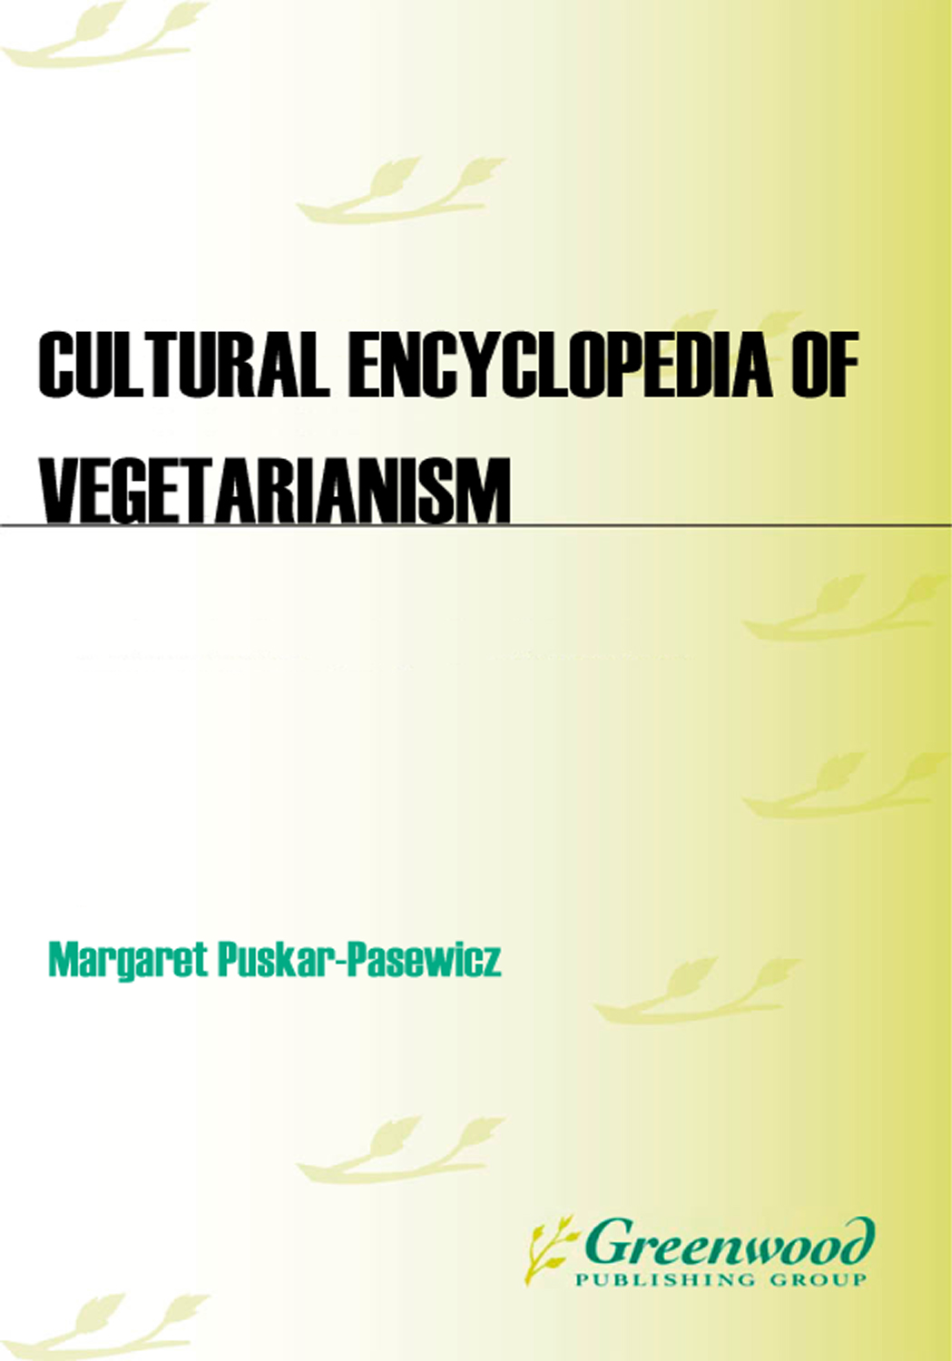 Cultural Encyclopedia of Vegetarianism page Cover1